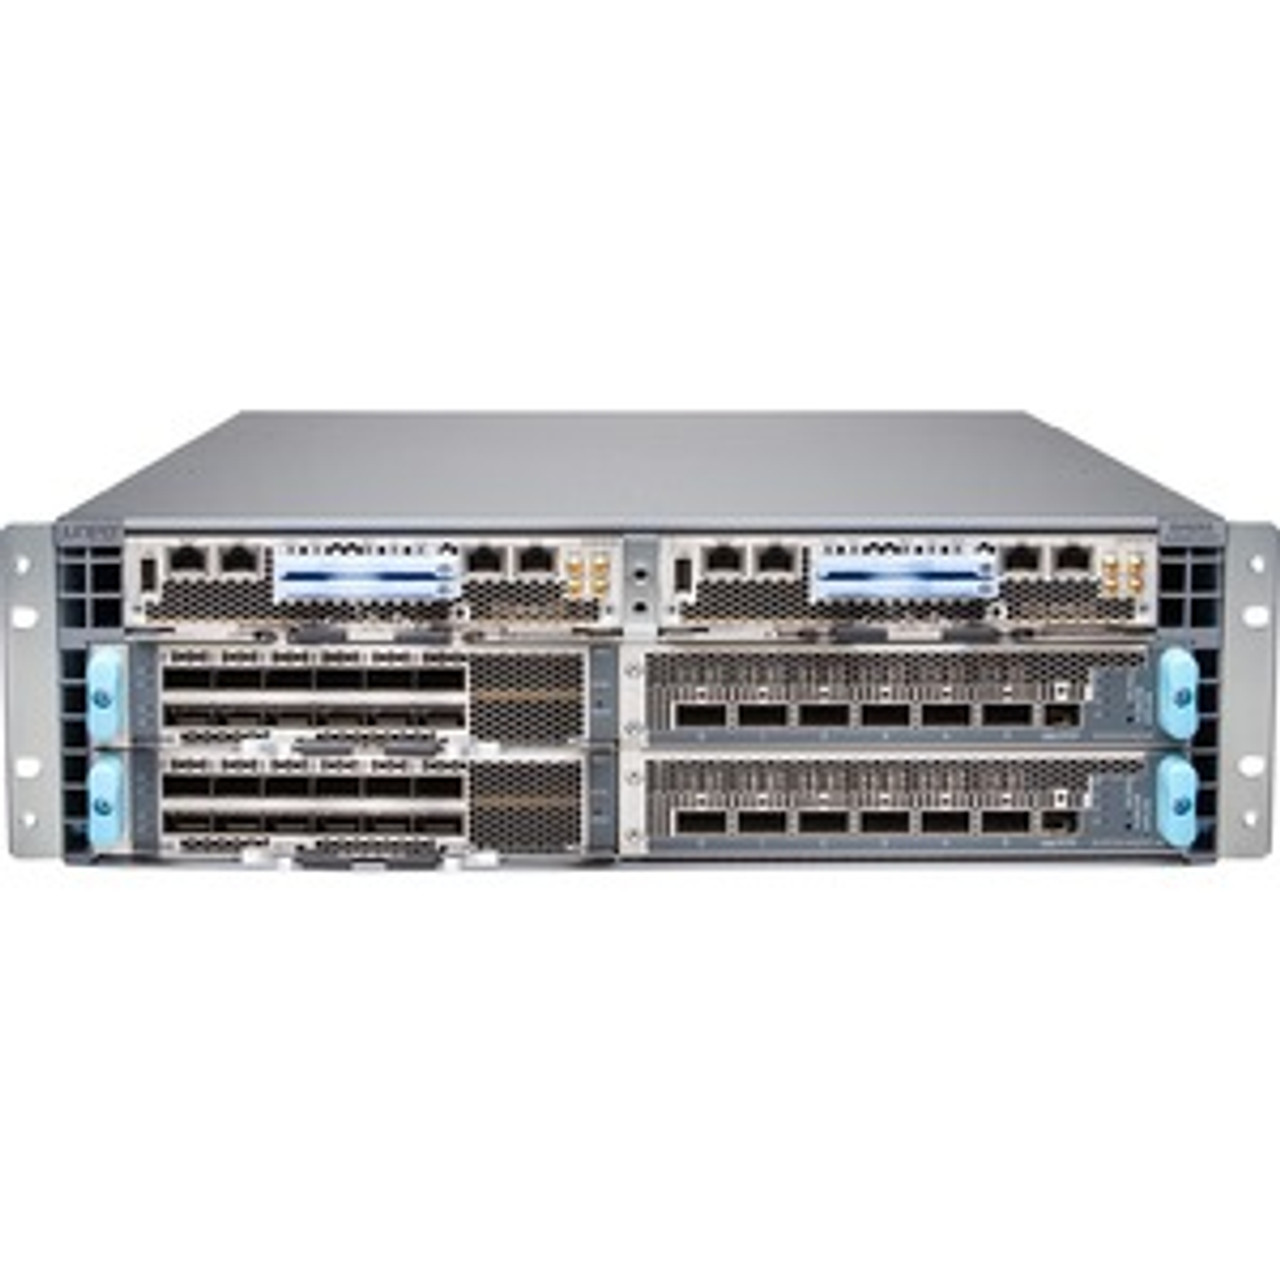 EX9253-BASE-DC Juniper Base EX9253 system configuration: 3-slot EX9253-CHAS-3RU chassis with 4x fan tray JAN-FAN-3RU 1x routing engine (Refurbished)